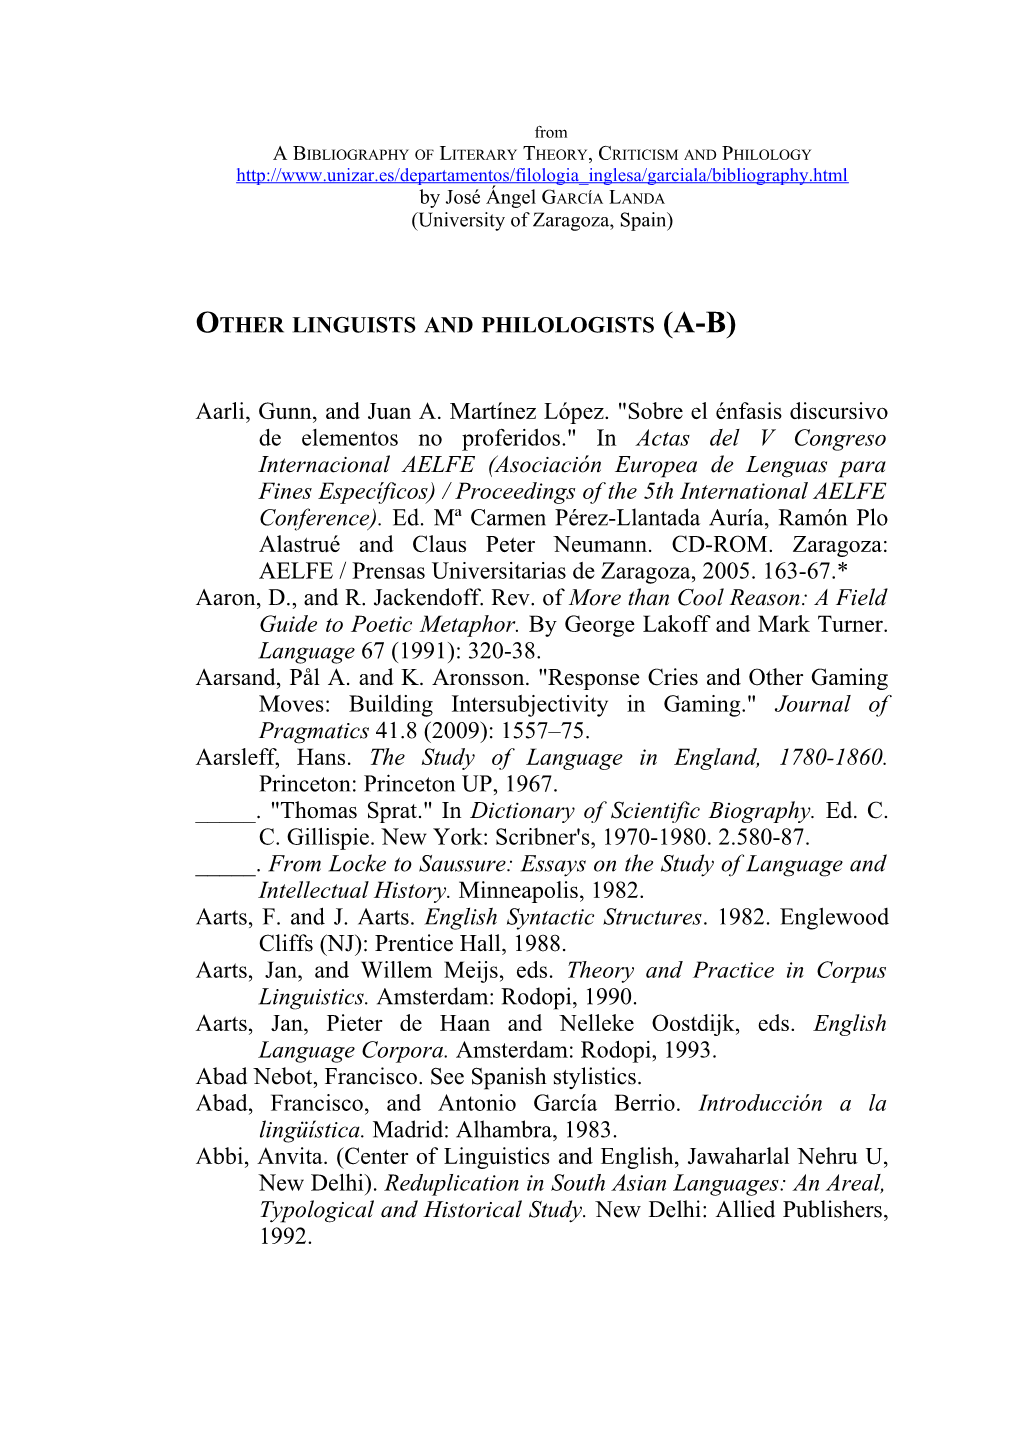 A Bibliography of Literary Theory, Criticism and Philology s1